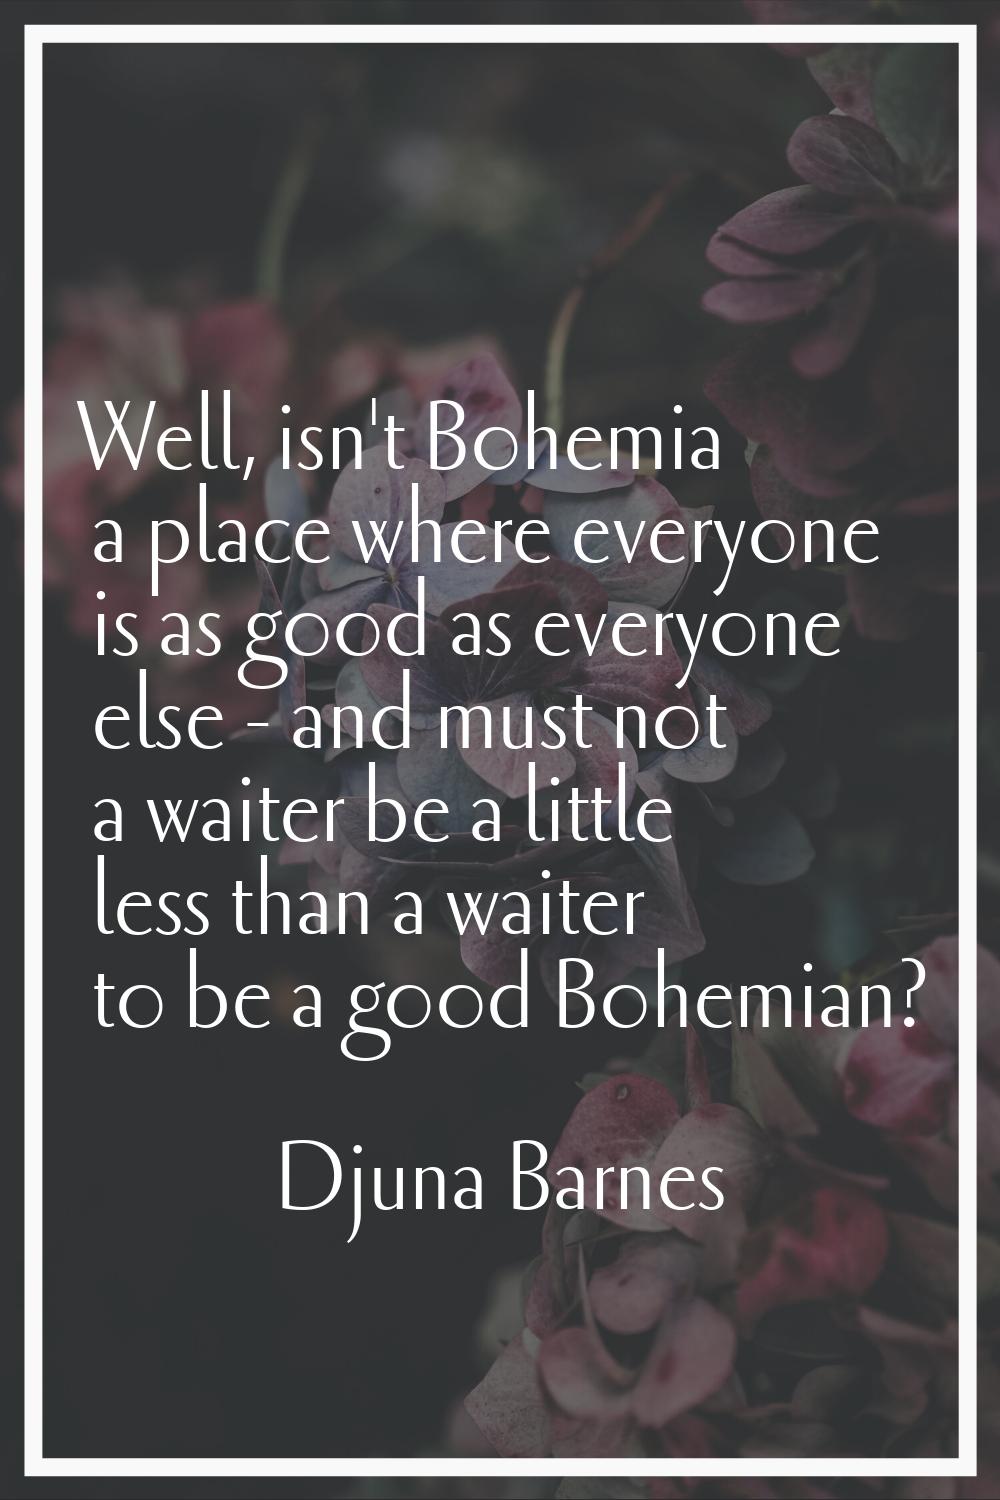 Well, isn't Bohemia a place where everyone is as good as everyone else - and must not a waiter be a